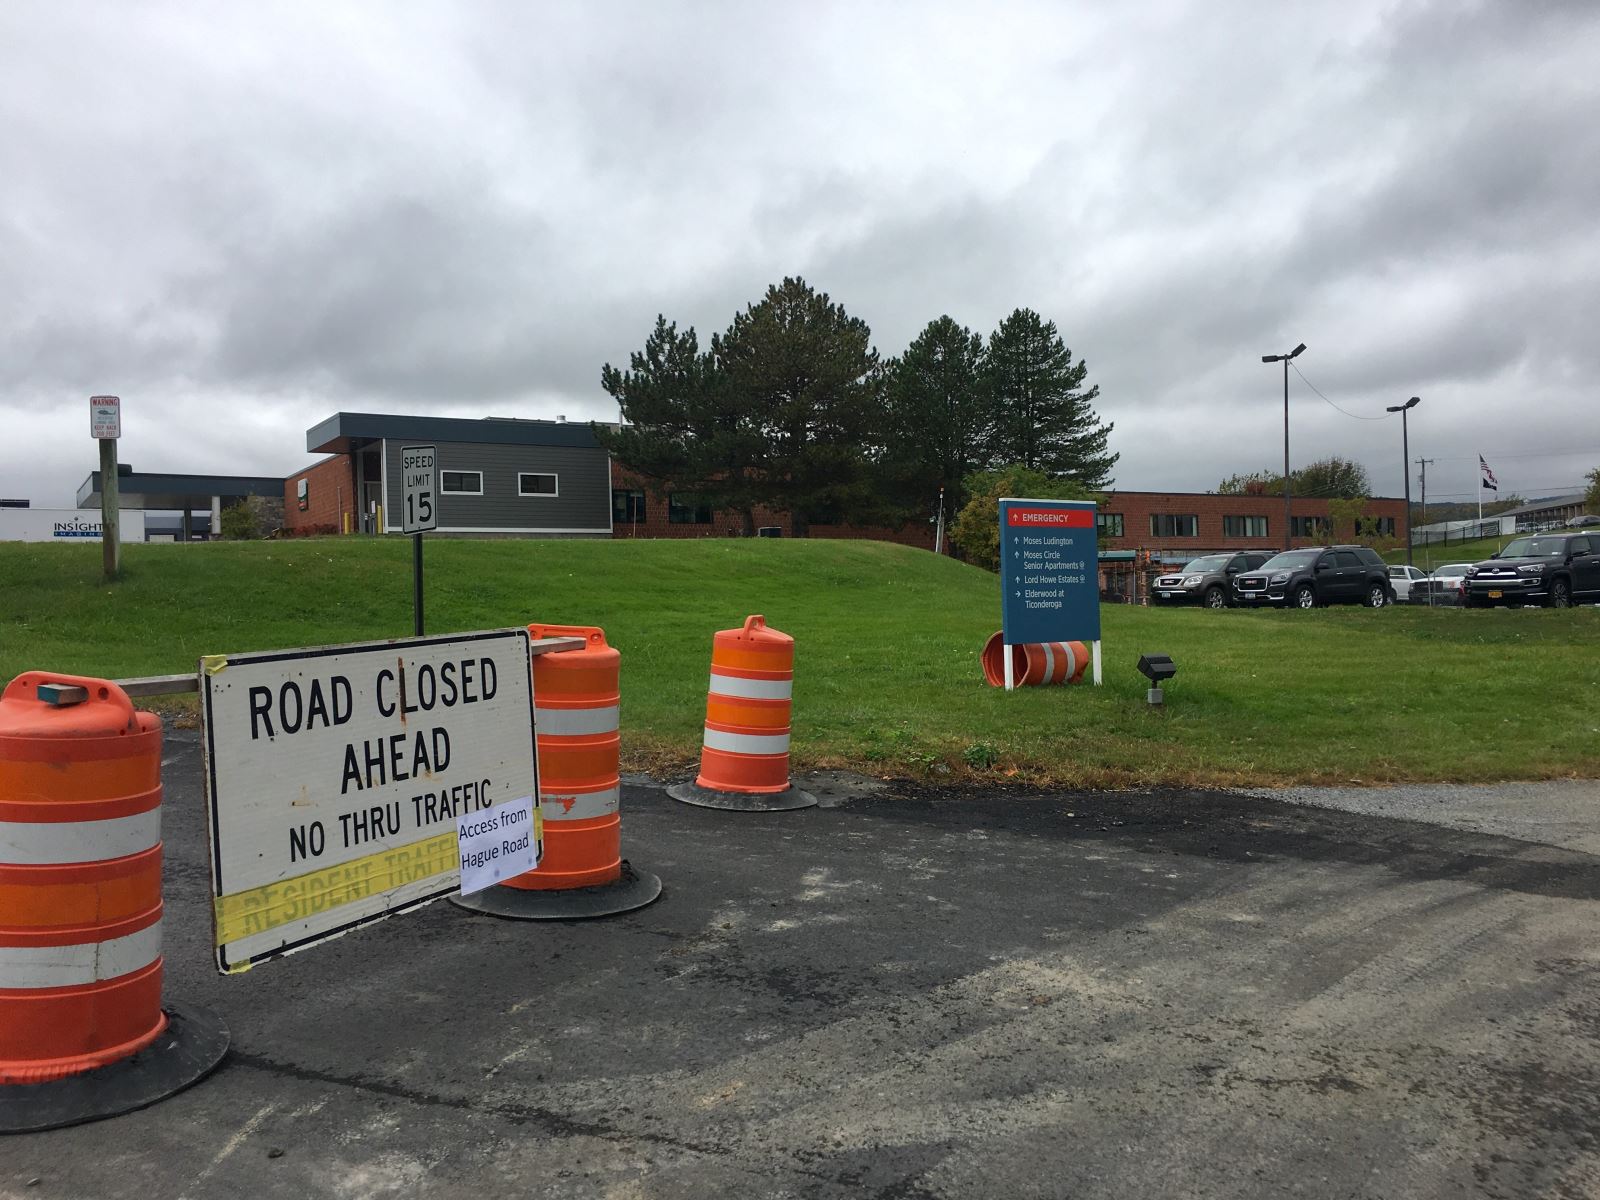 /data/images/general/Ticonderoga%20Campus%20Roadway%20Project%20Requires%20Closure%20of%20Wicker%20Street%20Entrance.jpg